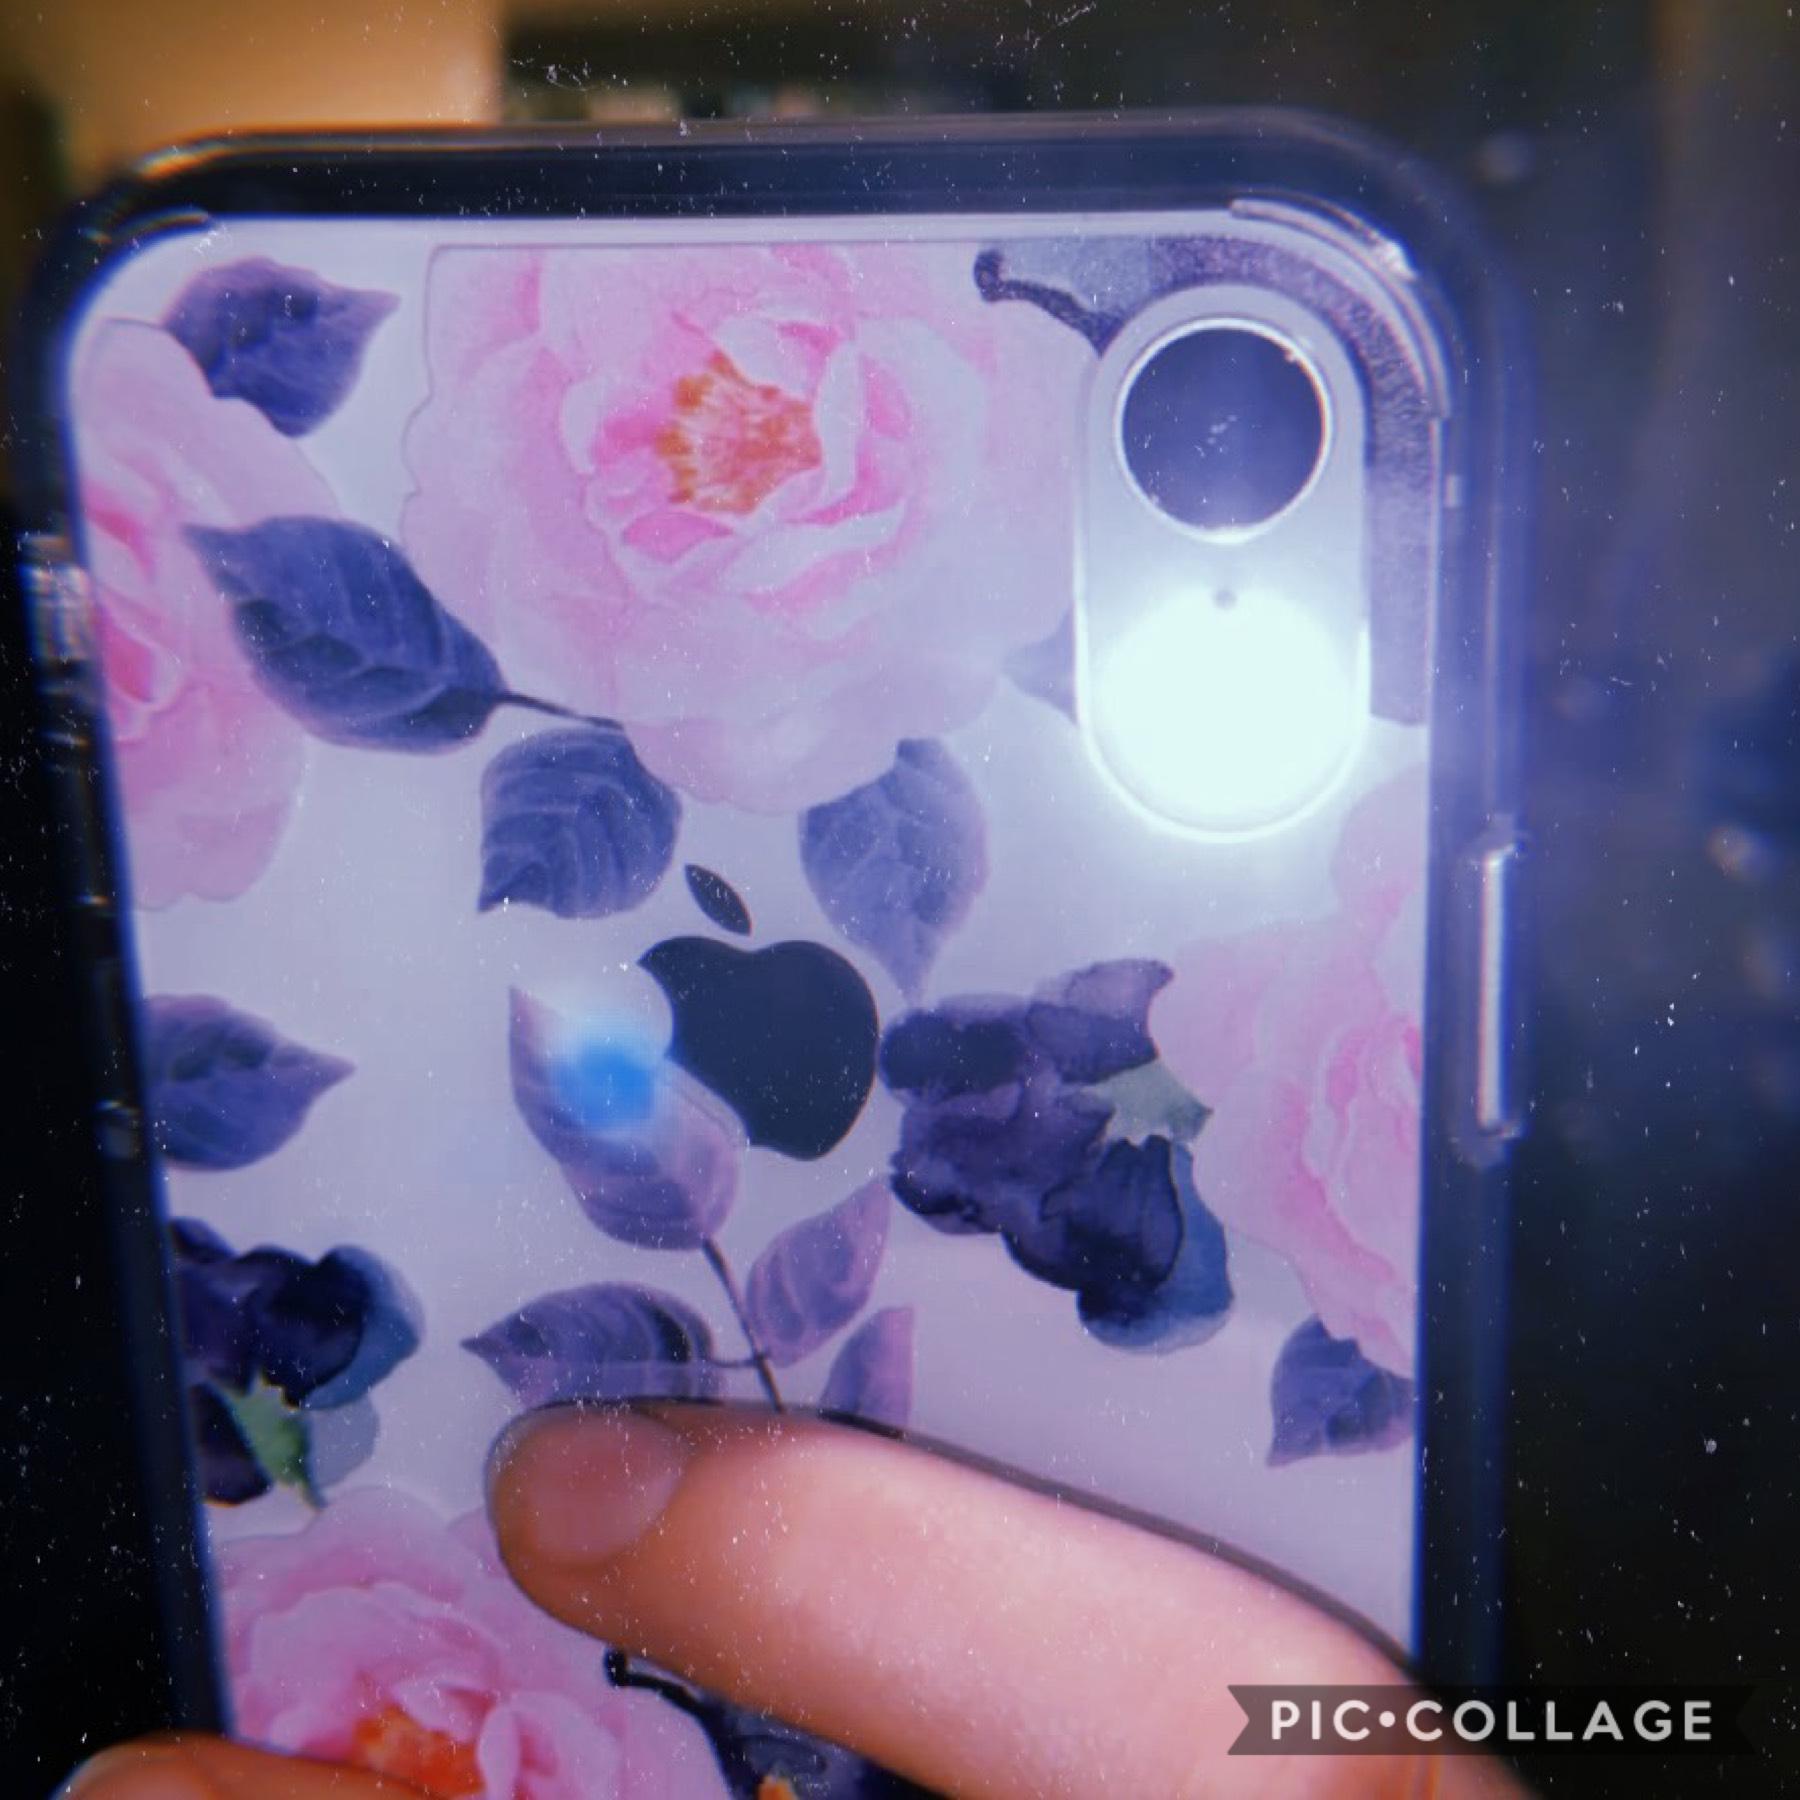 ahhh i just got this case for my new phone and i love it so much